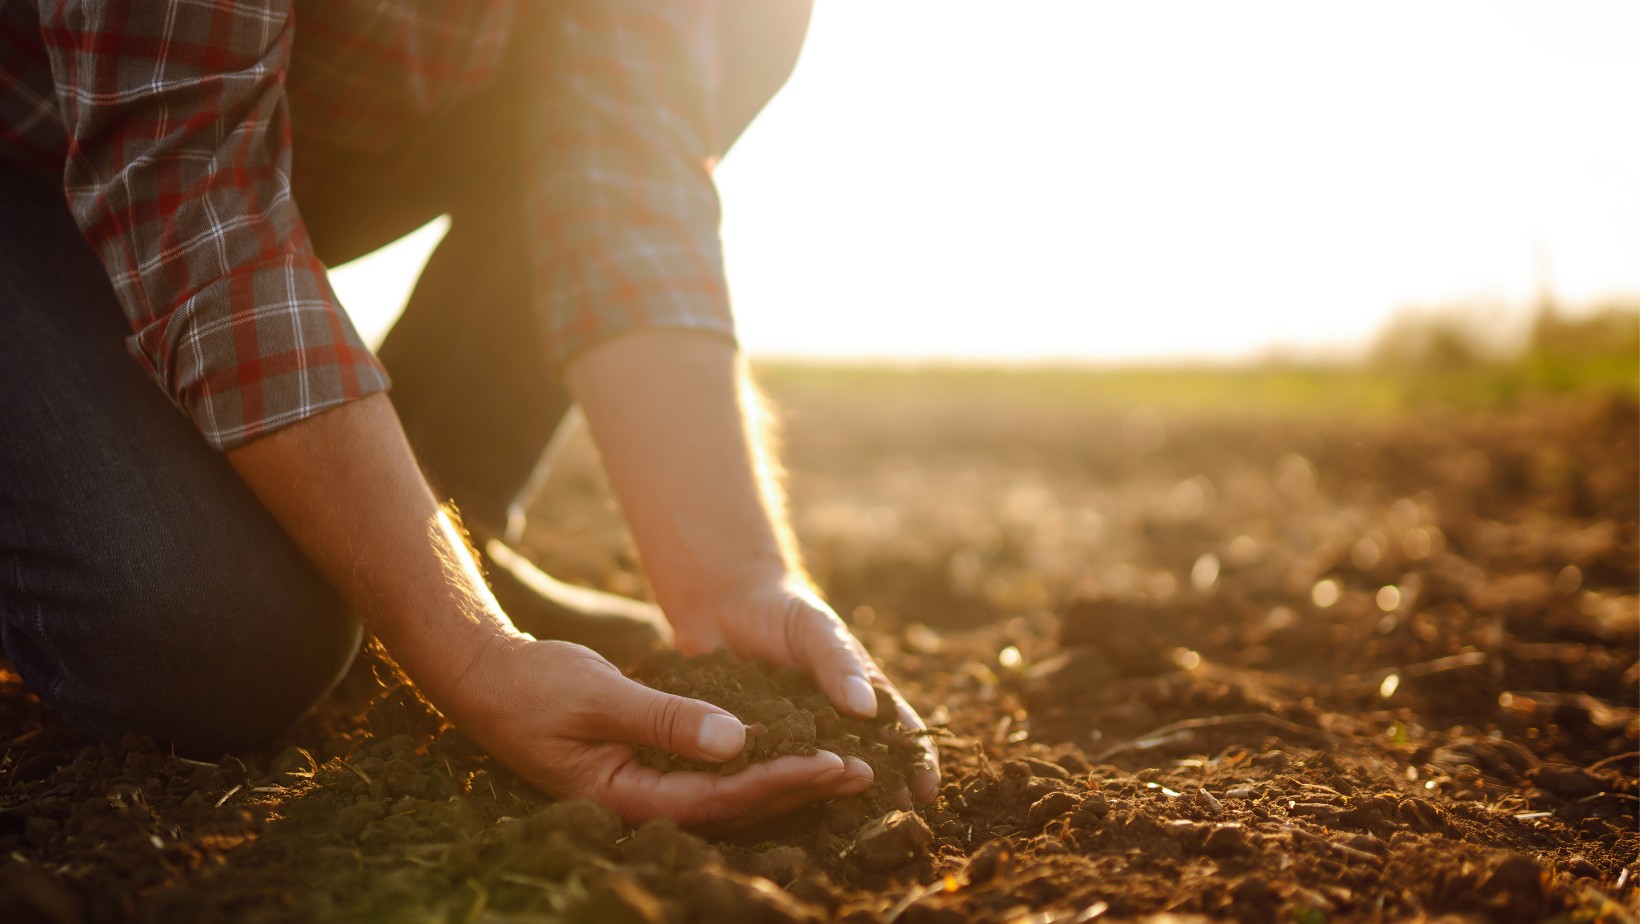 A man grabbing soil from the ground in his hands